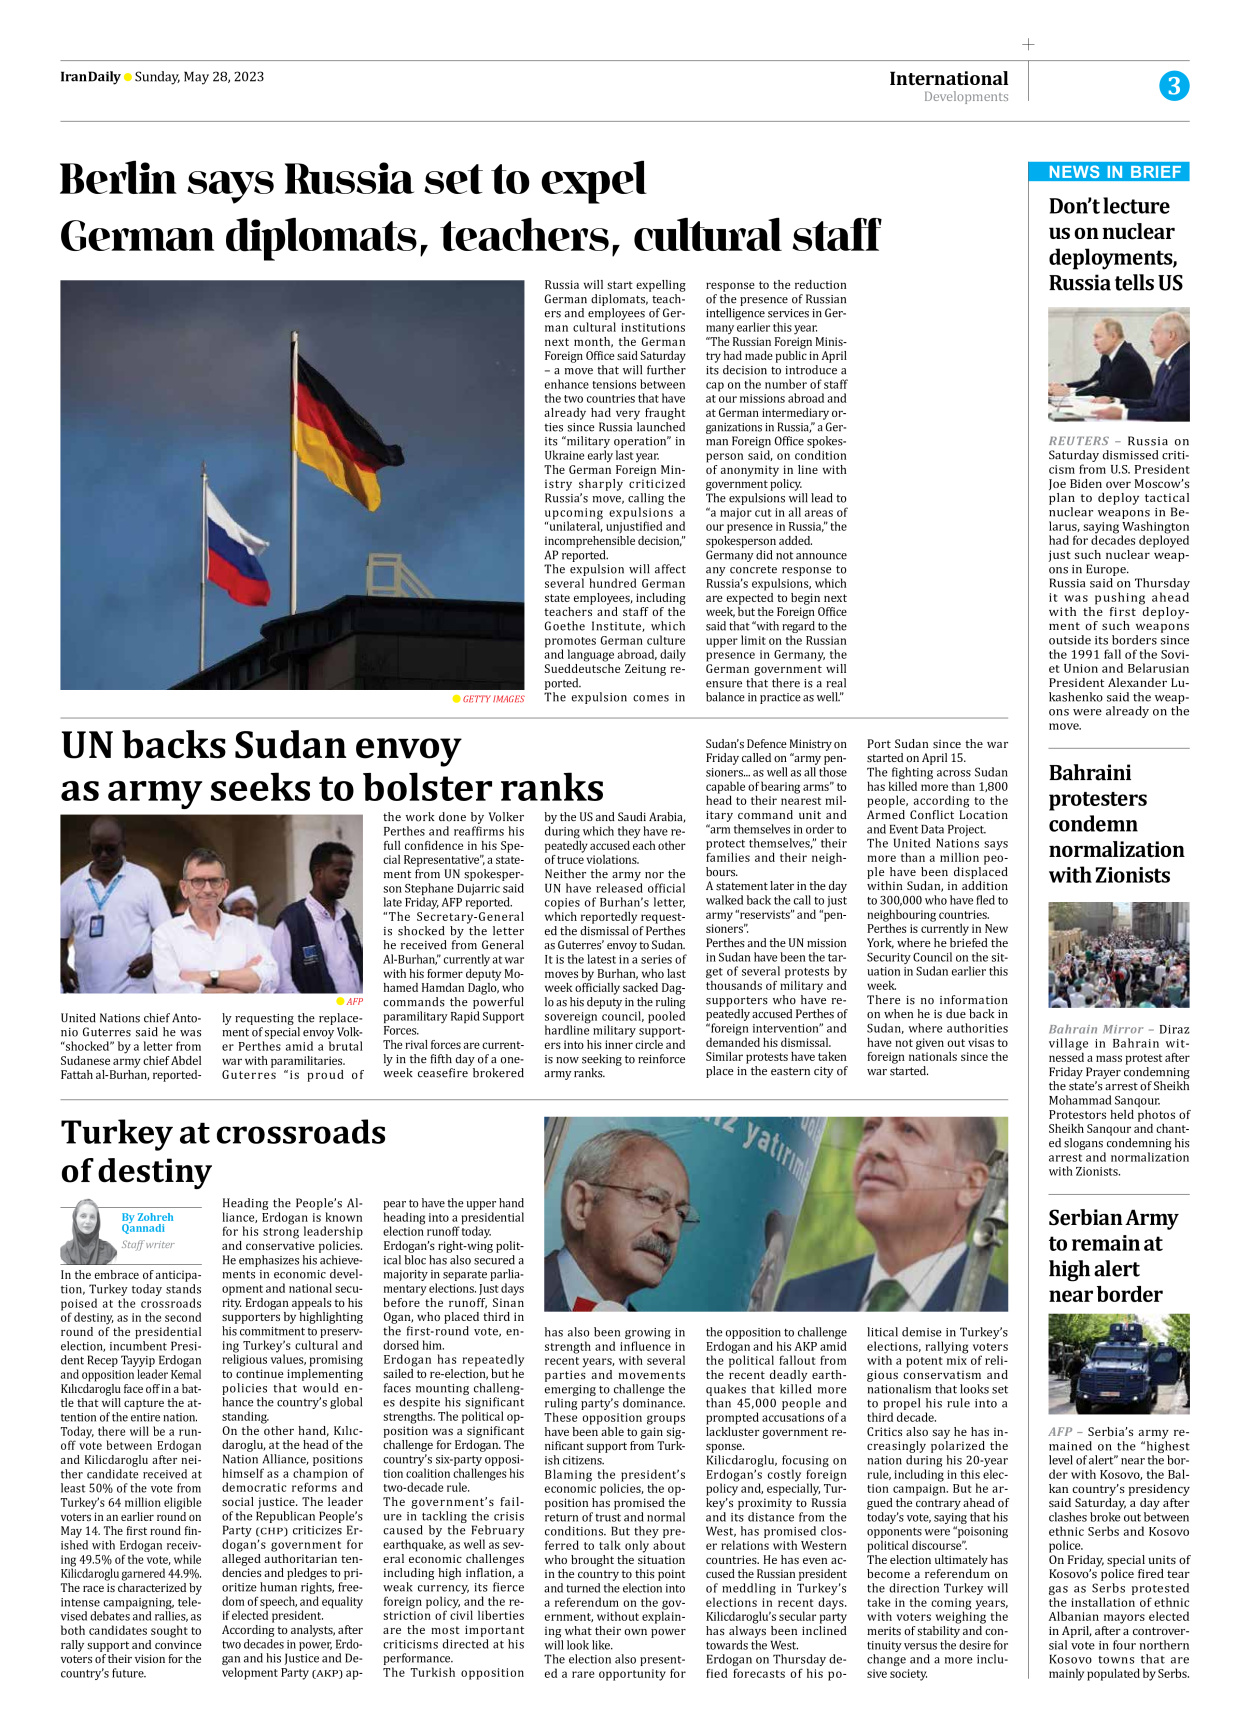 Iran Daily - Number Seven Thousand Three Hundred and Two - 28 May 2023 - Page 3